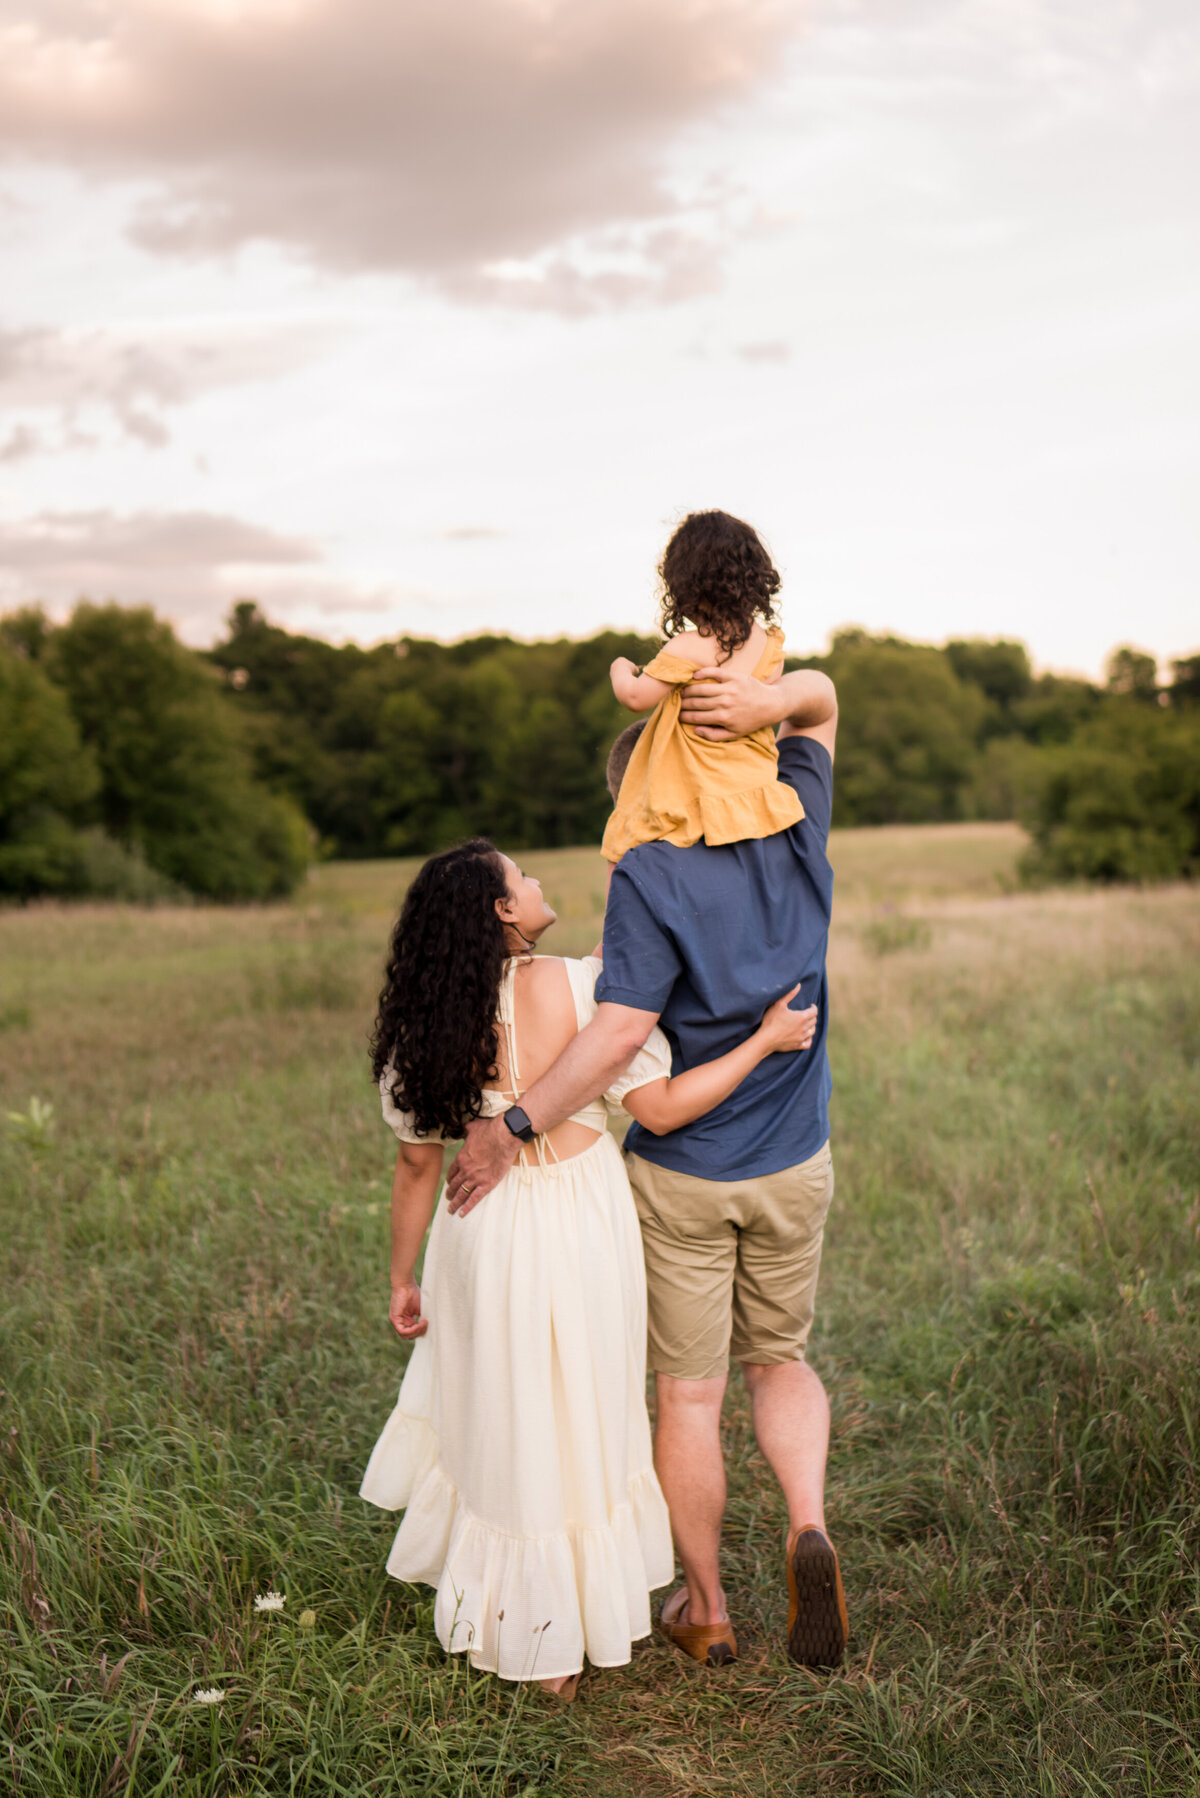 Boston-family-photographer-bella-wang-photography-Lifestyle-session-outdoor-wildflower-91